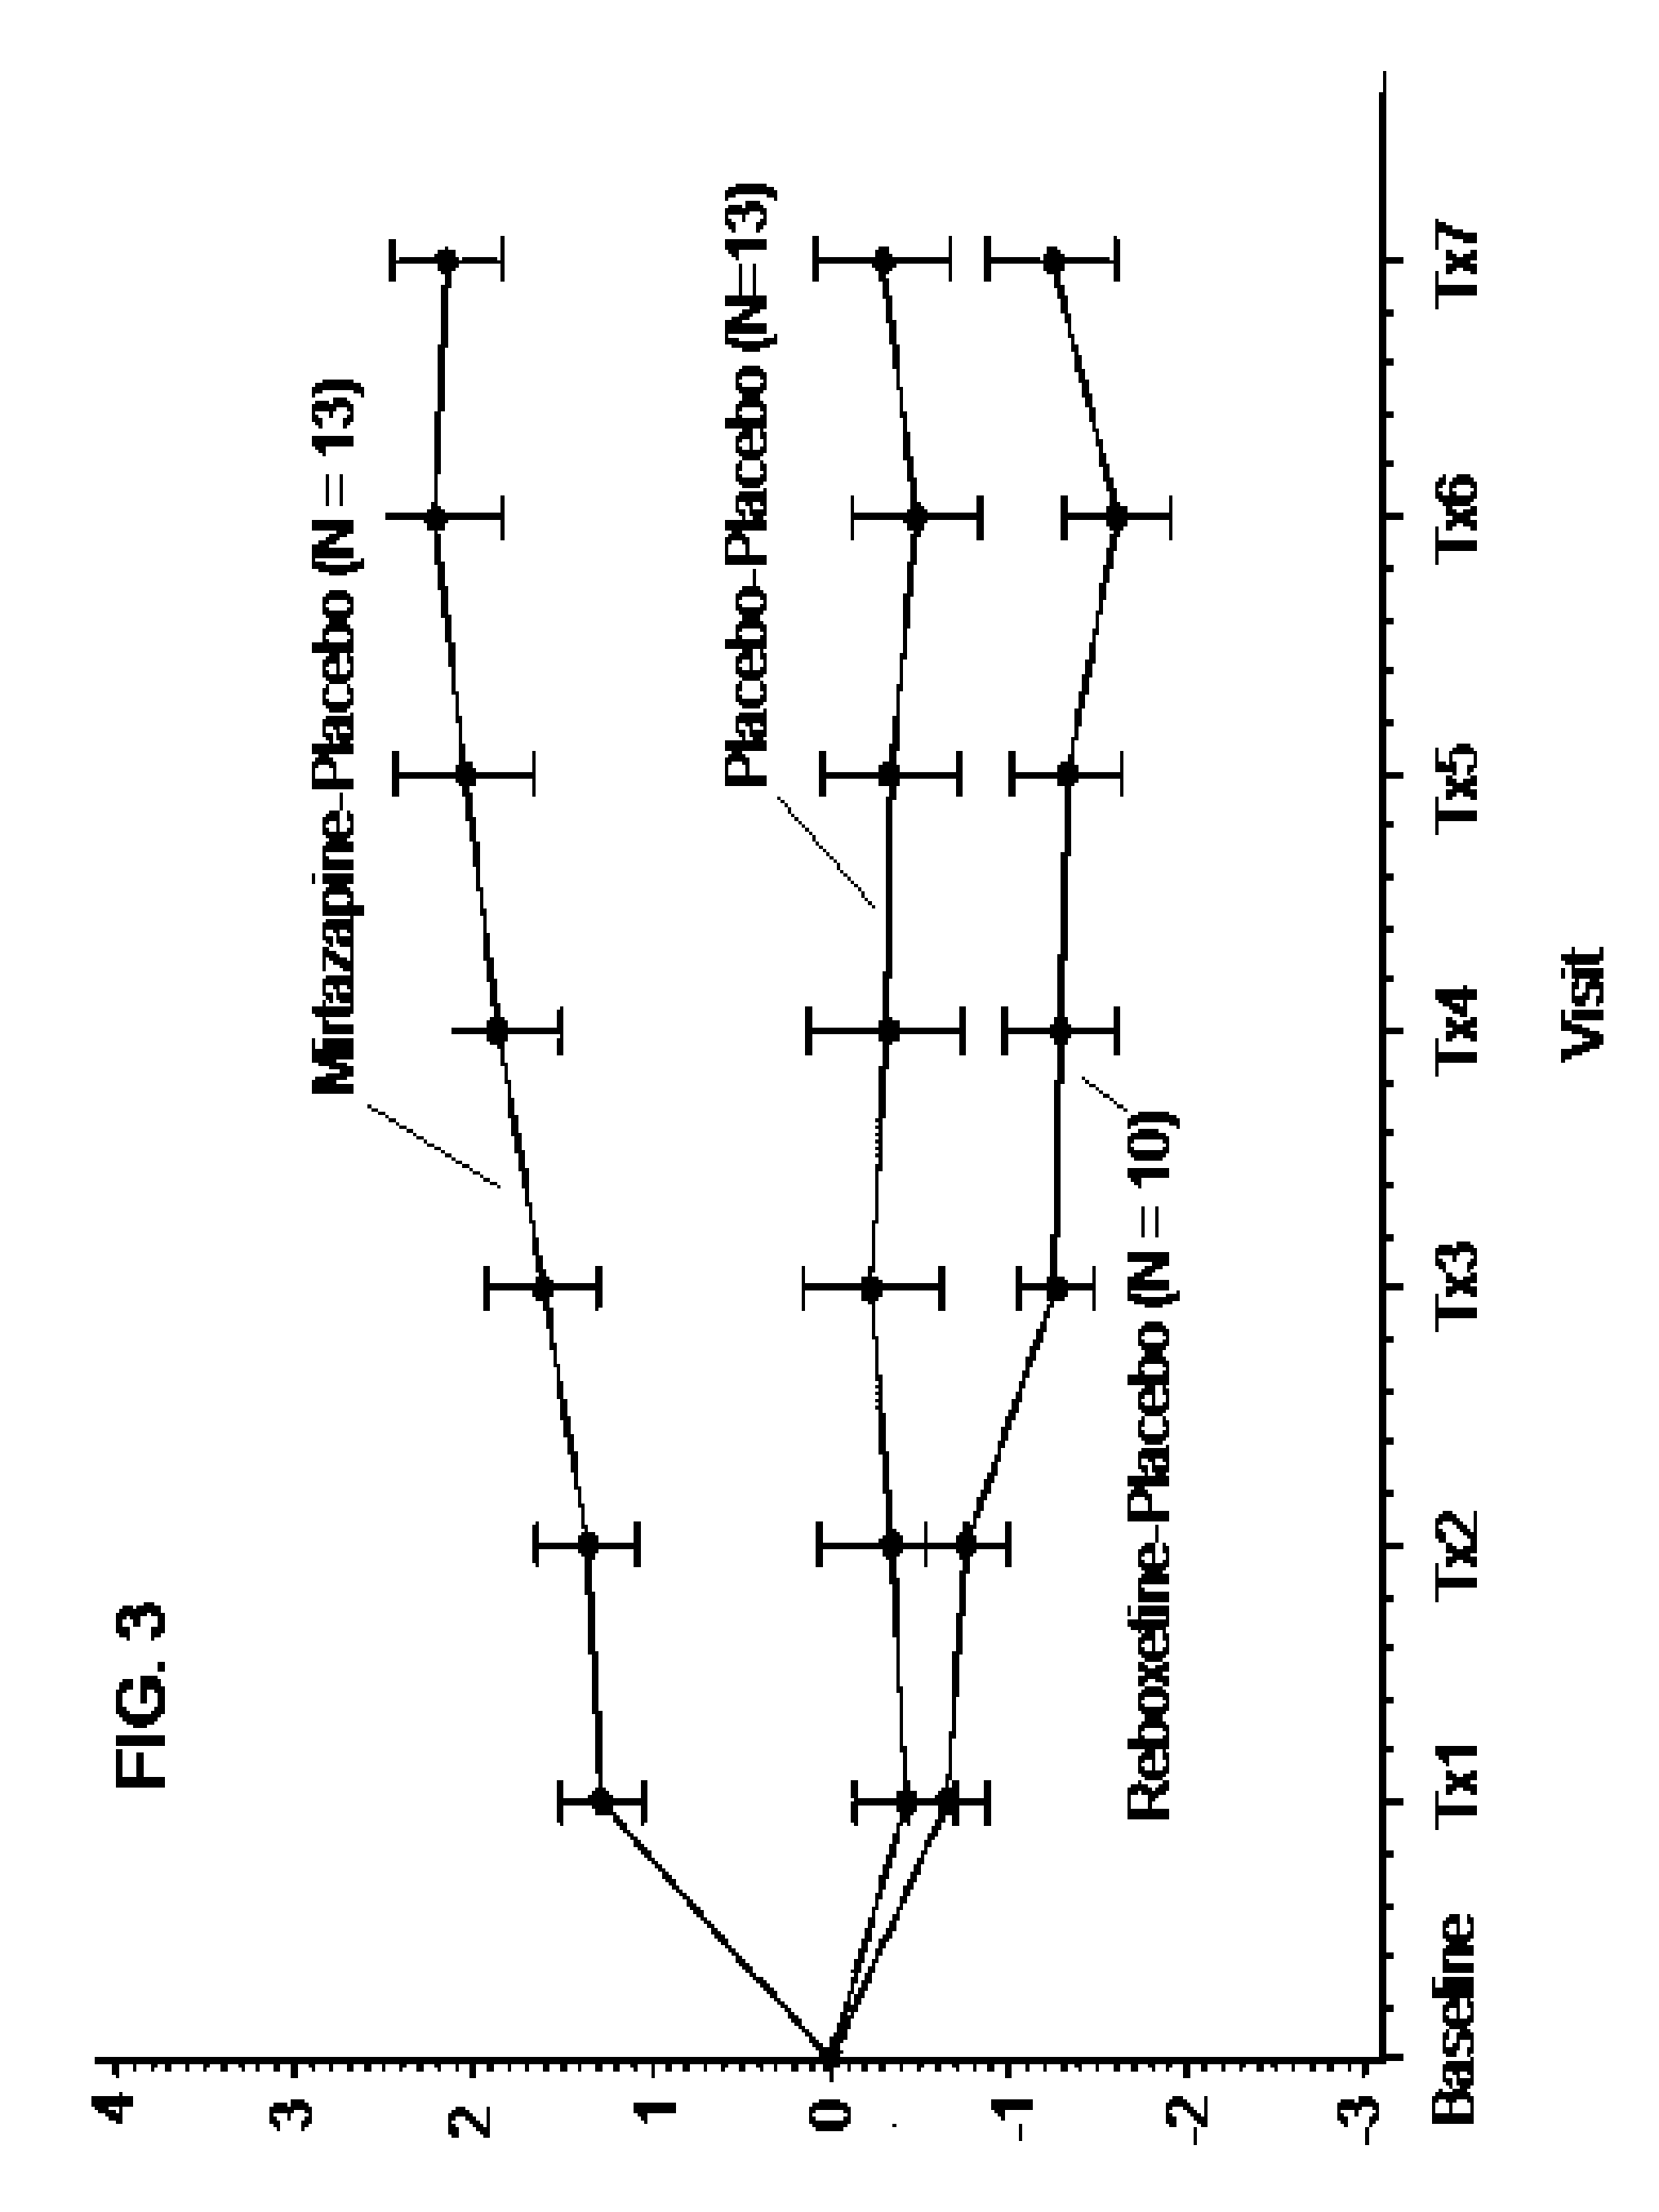 Tolerability of mirtazapine and a second active by using them in combination